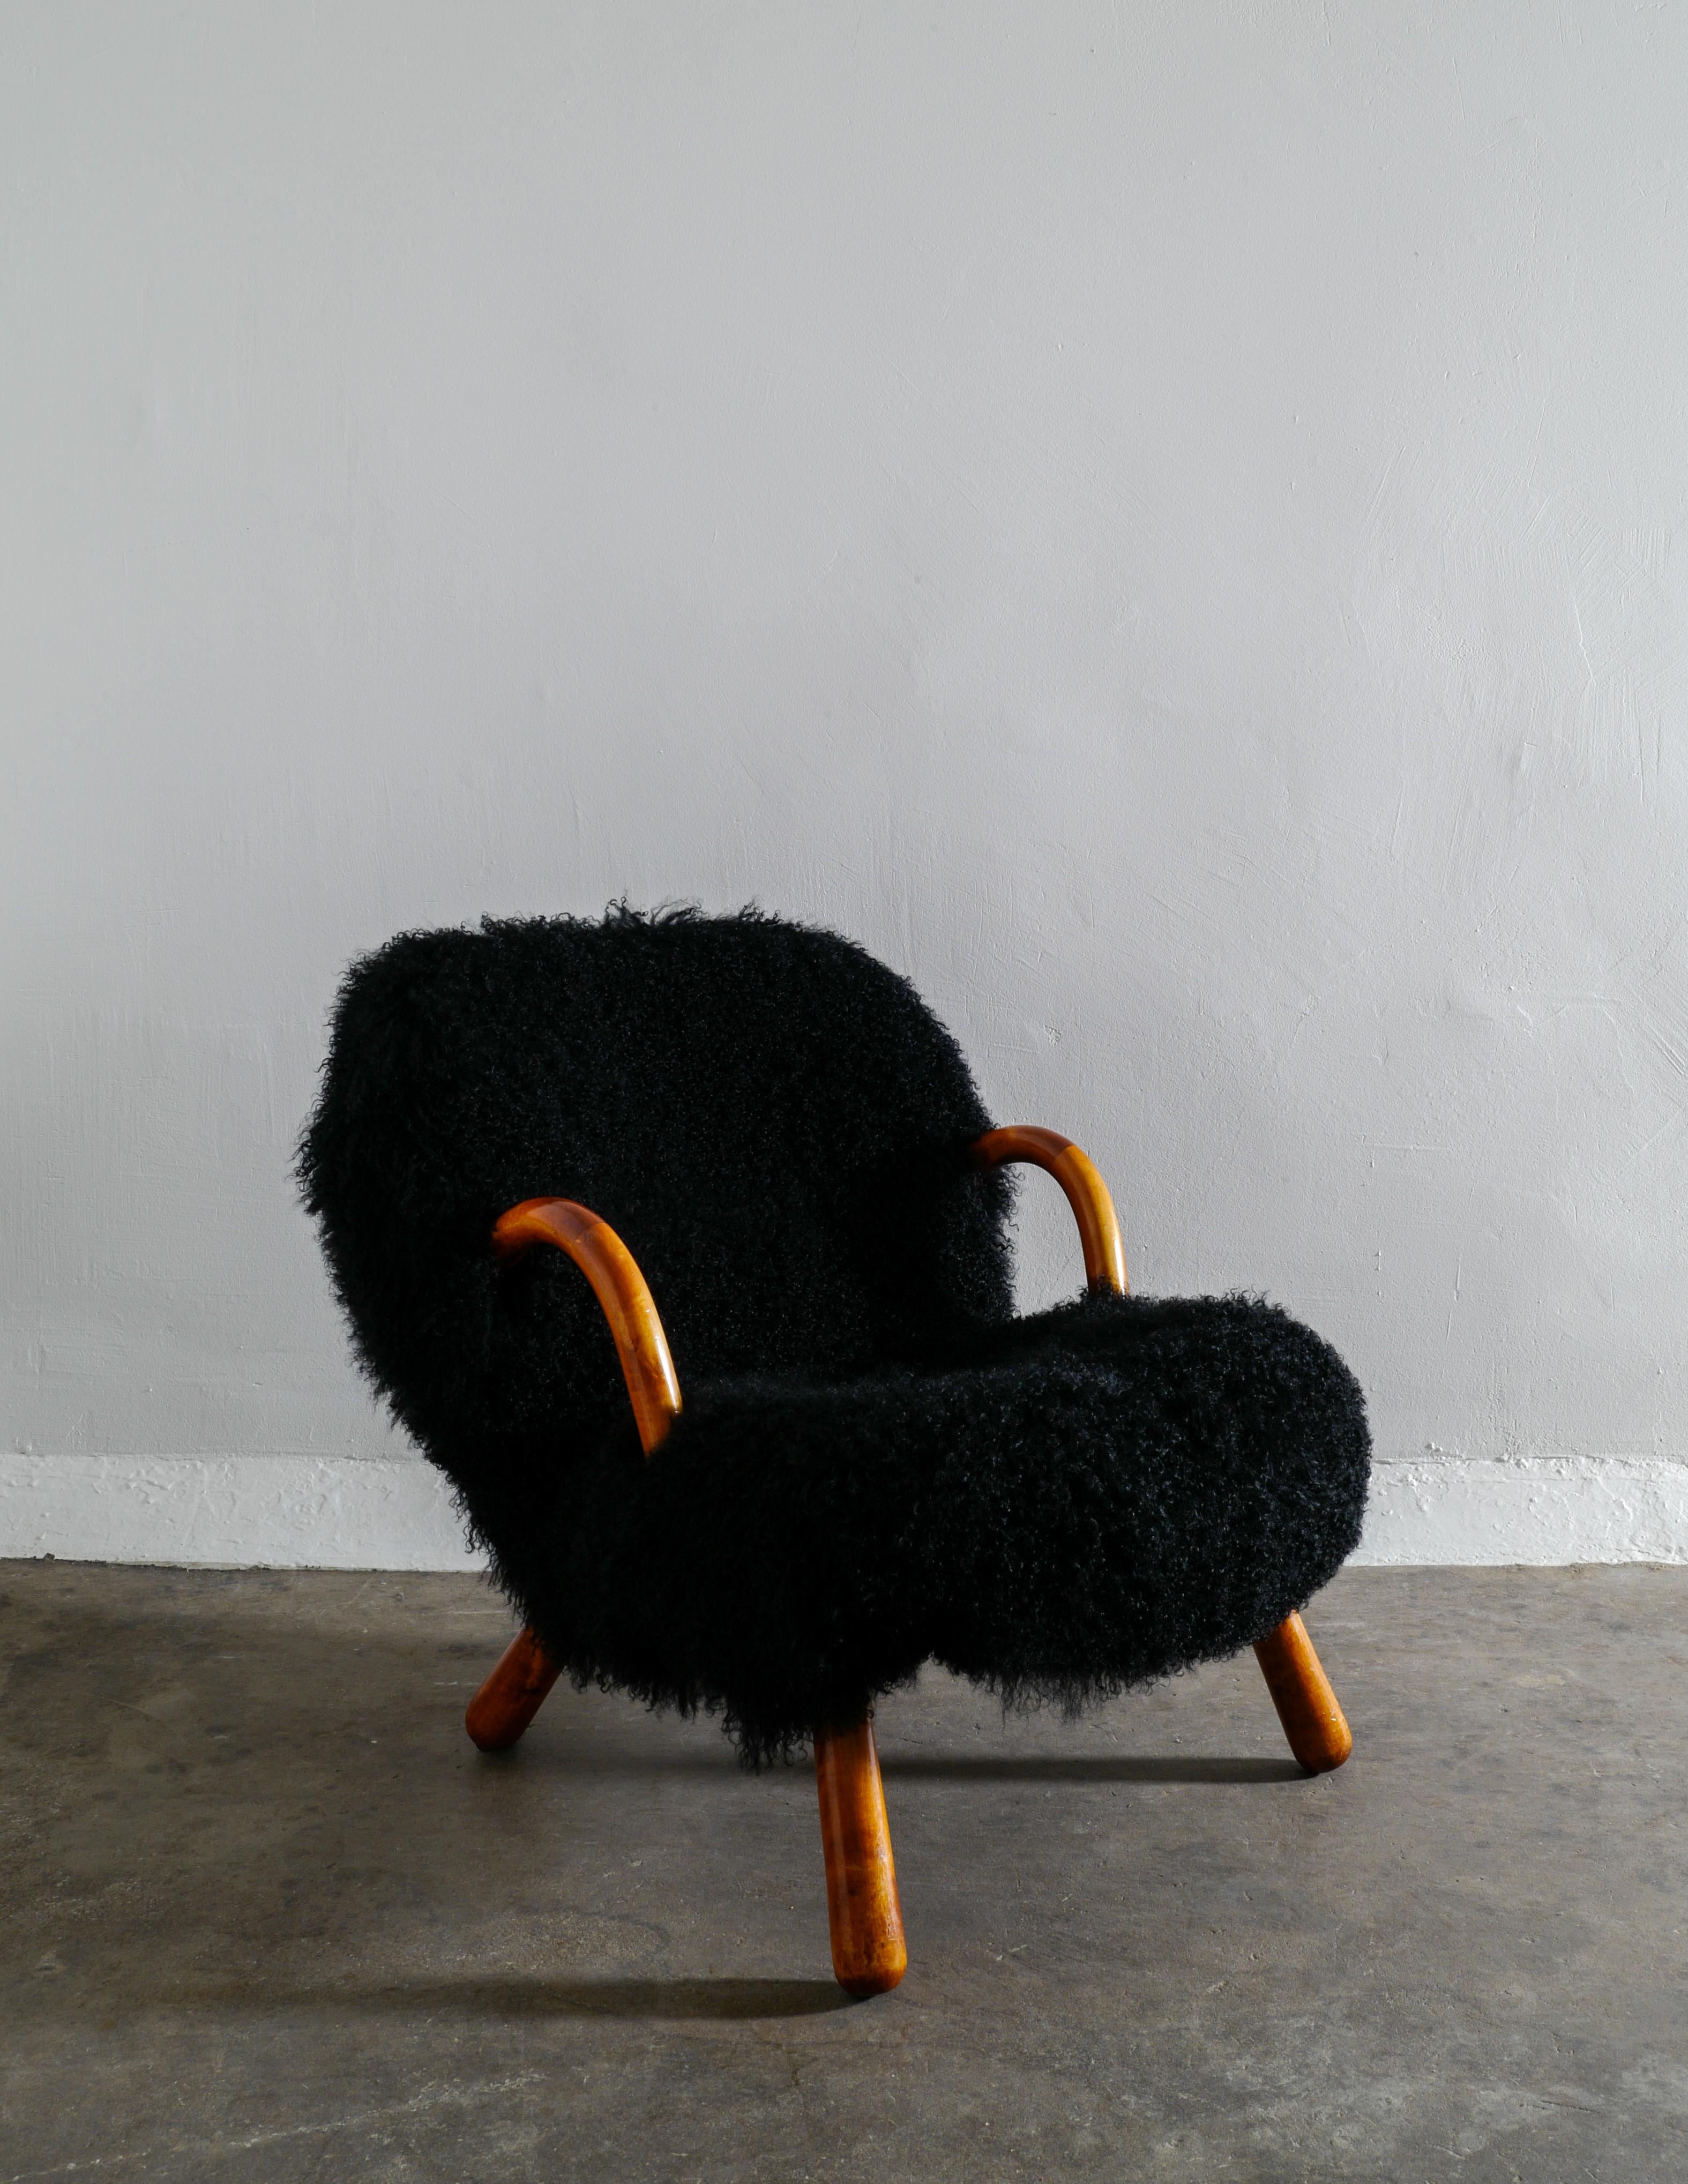 Rare clam chair designed by Philip Arctander and produced by Vik & Blindheim, Norway in the 1940s. Newly restored and upholstered in a black curly sheepskin. In good vintage condition with small signs from age and use. Original patina in arms and